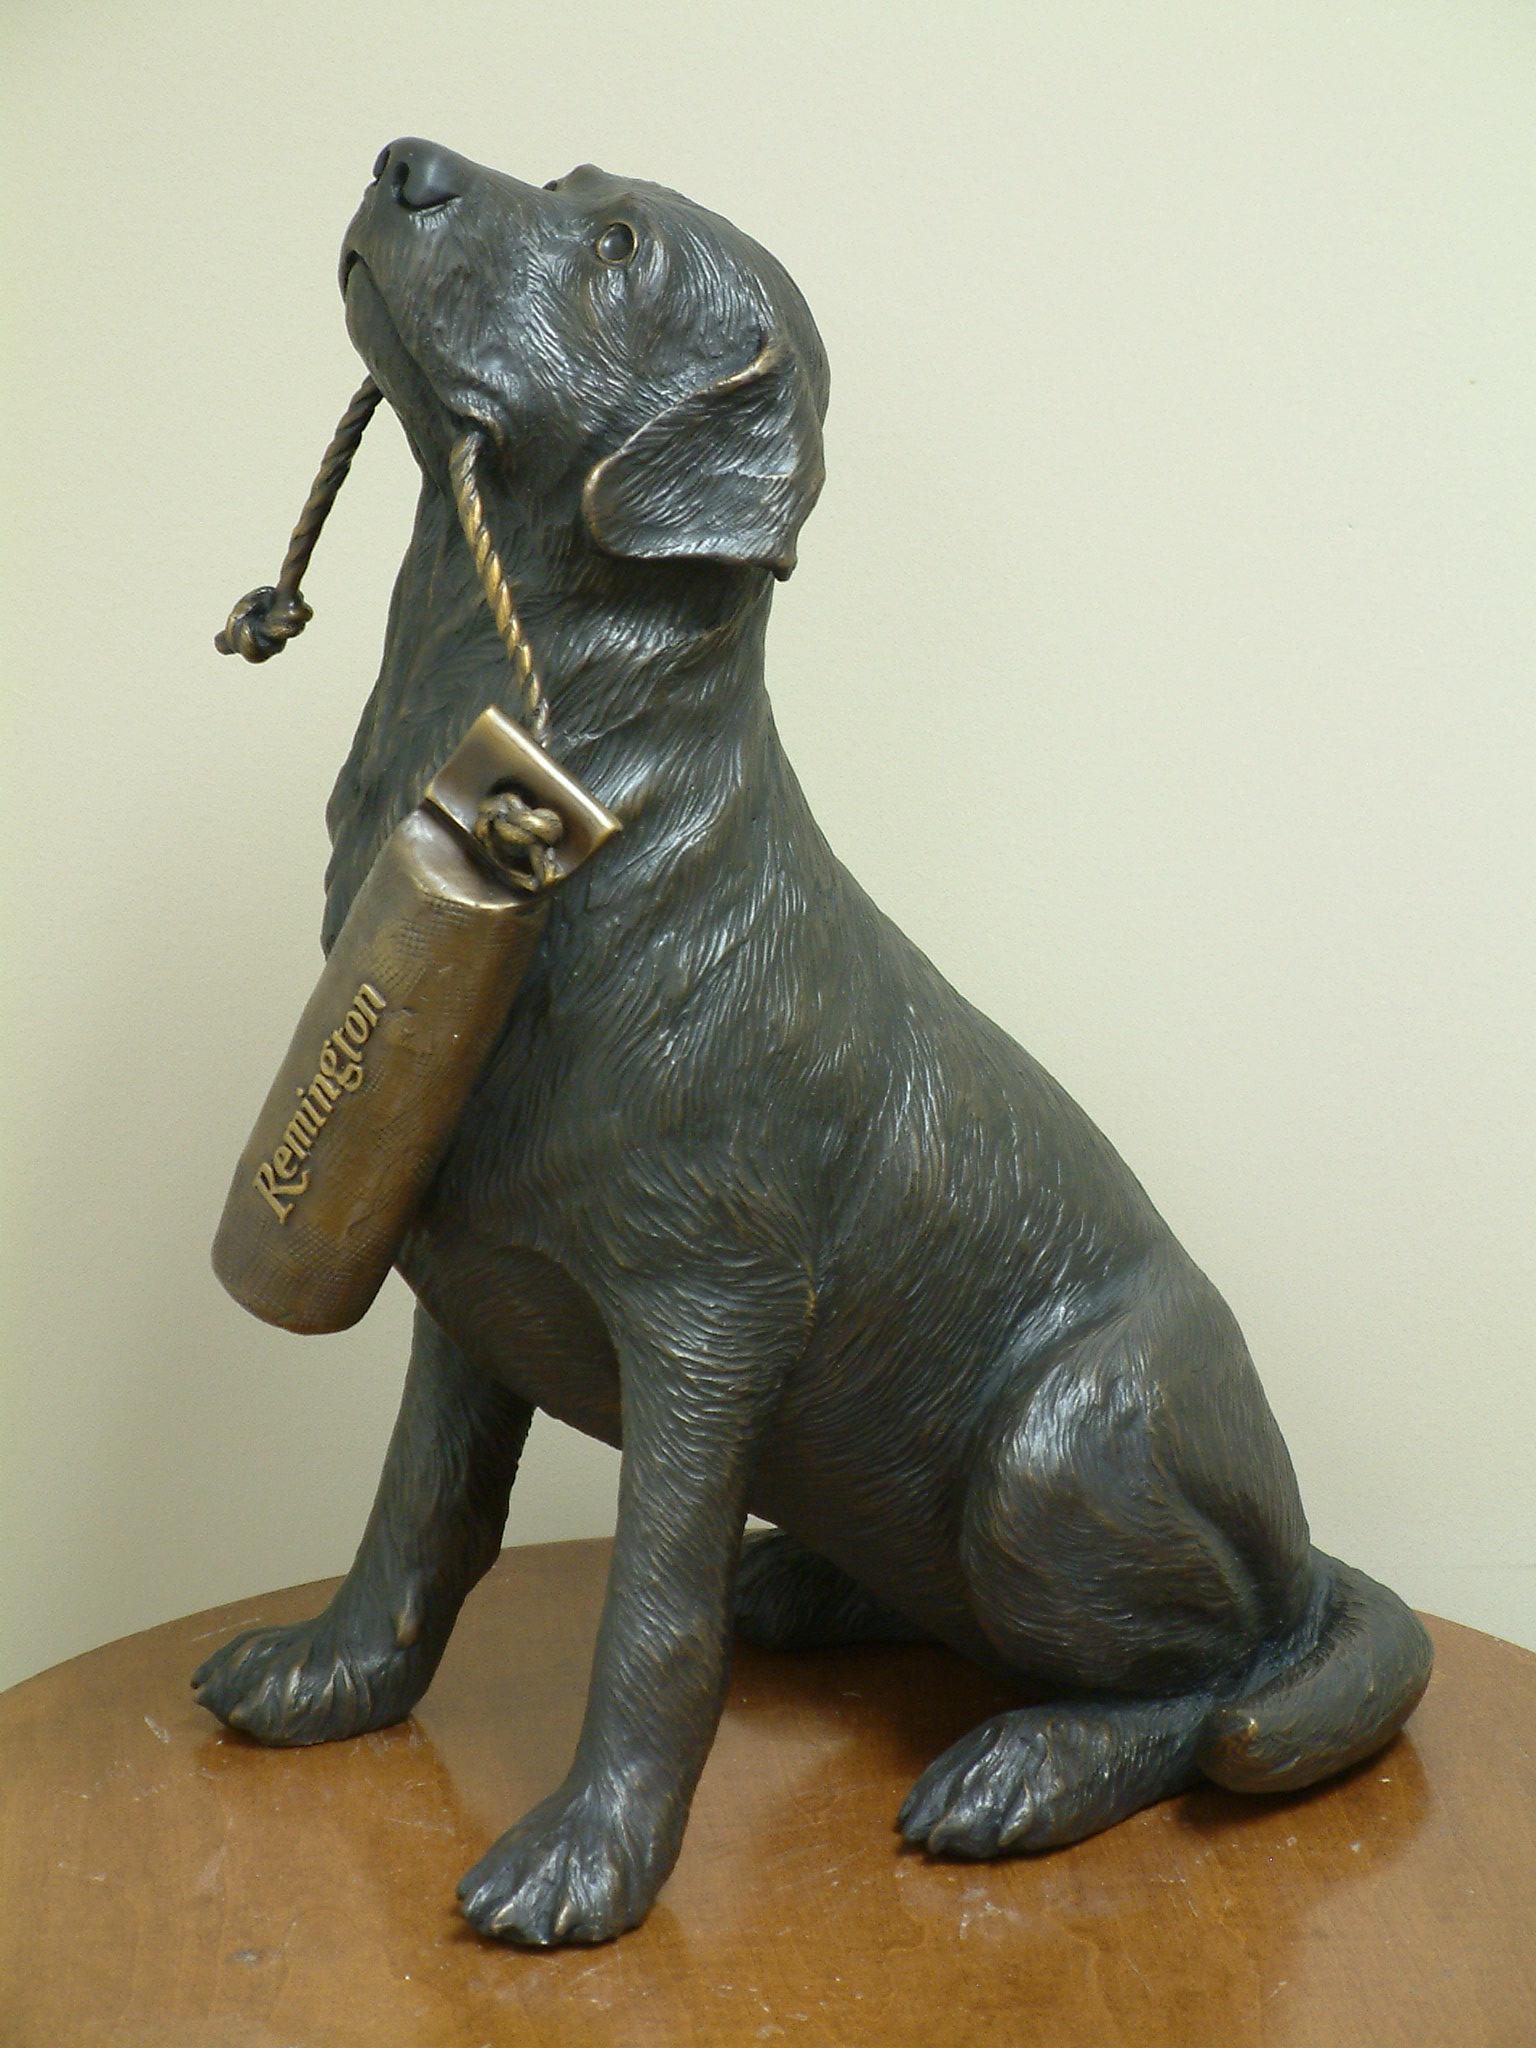 Has been in artist's private collection. 

Maquette hunting dog with training dummy.